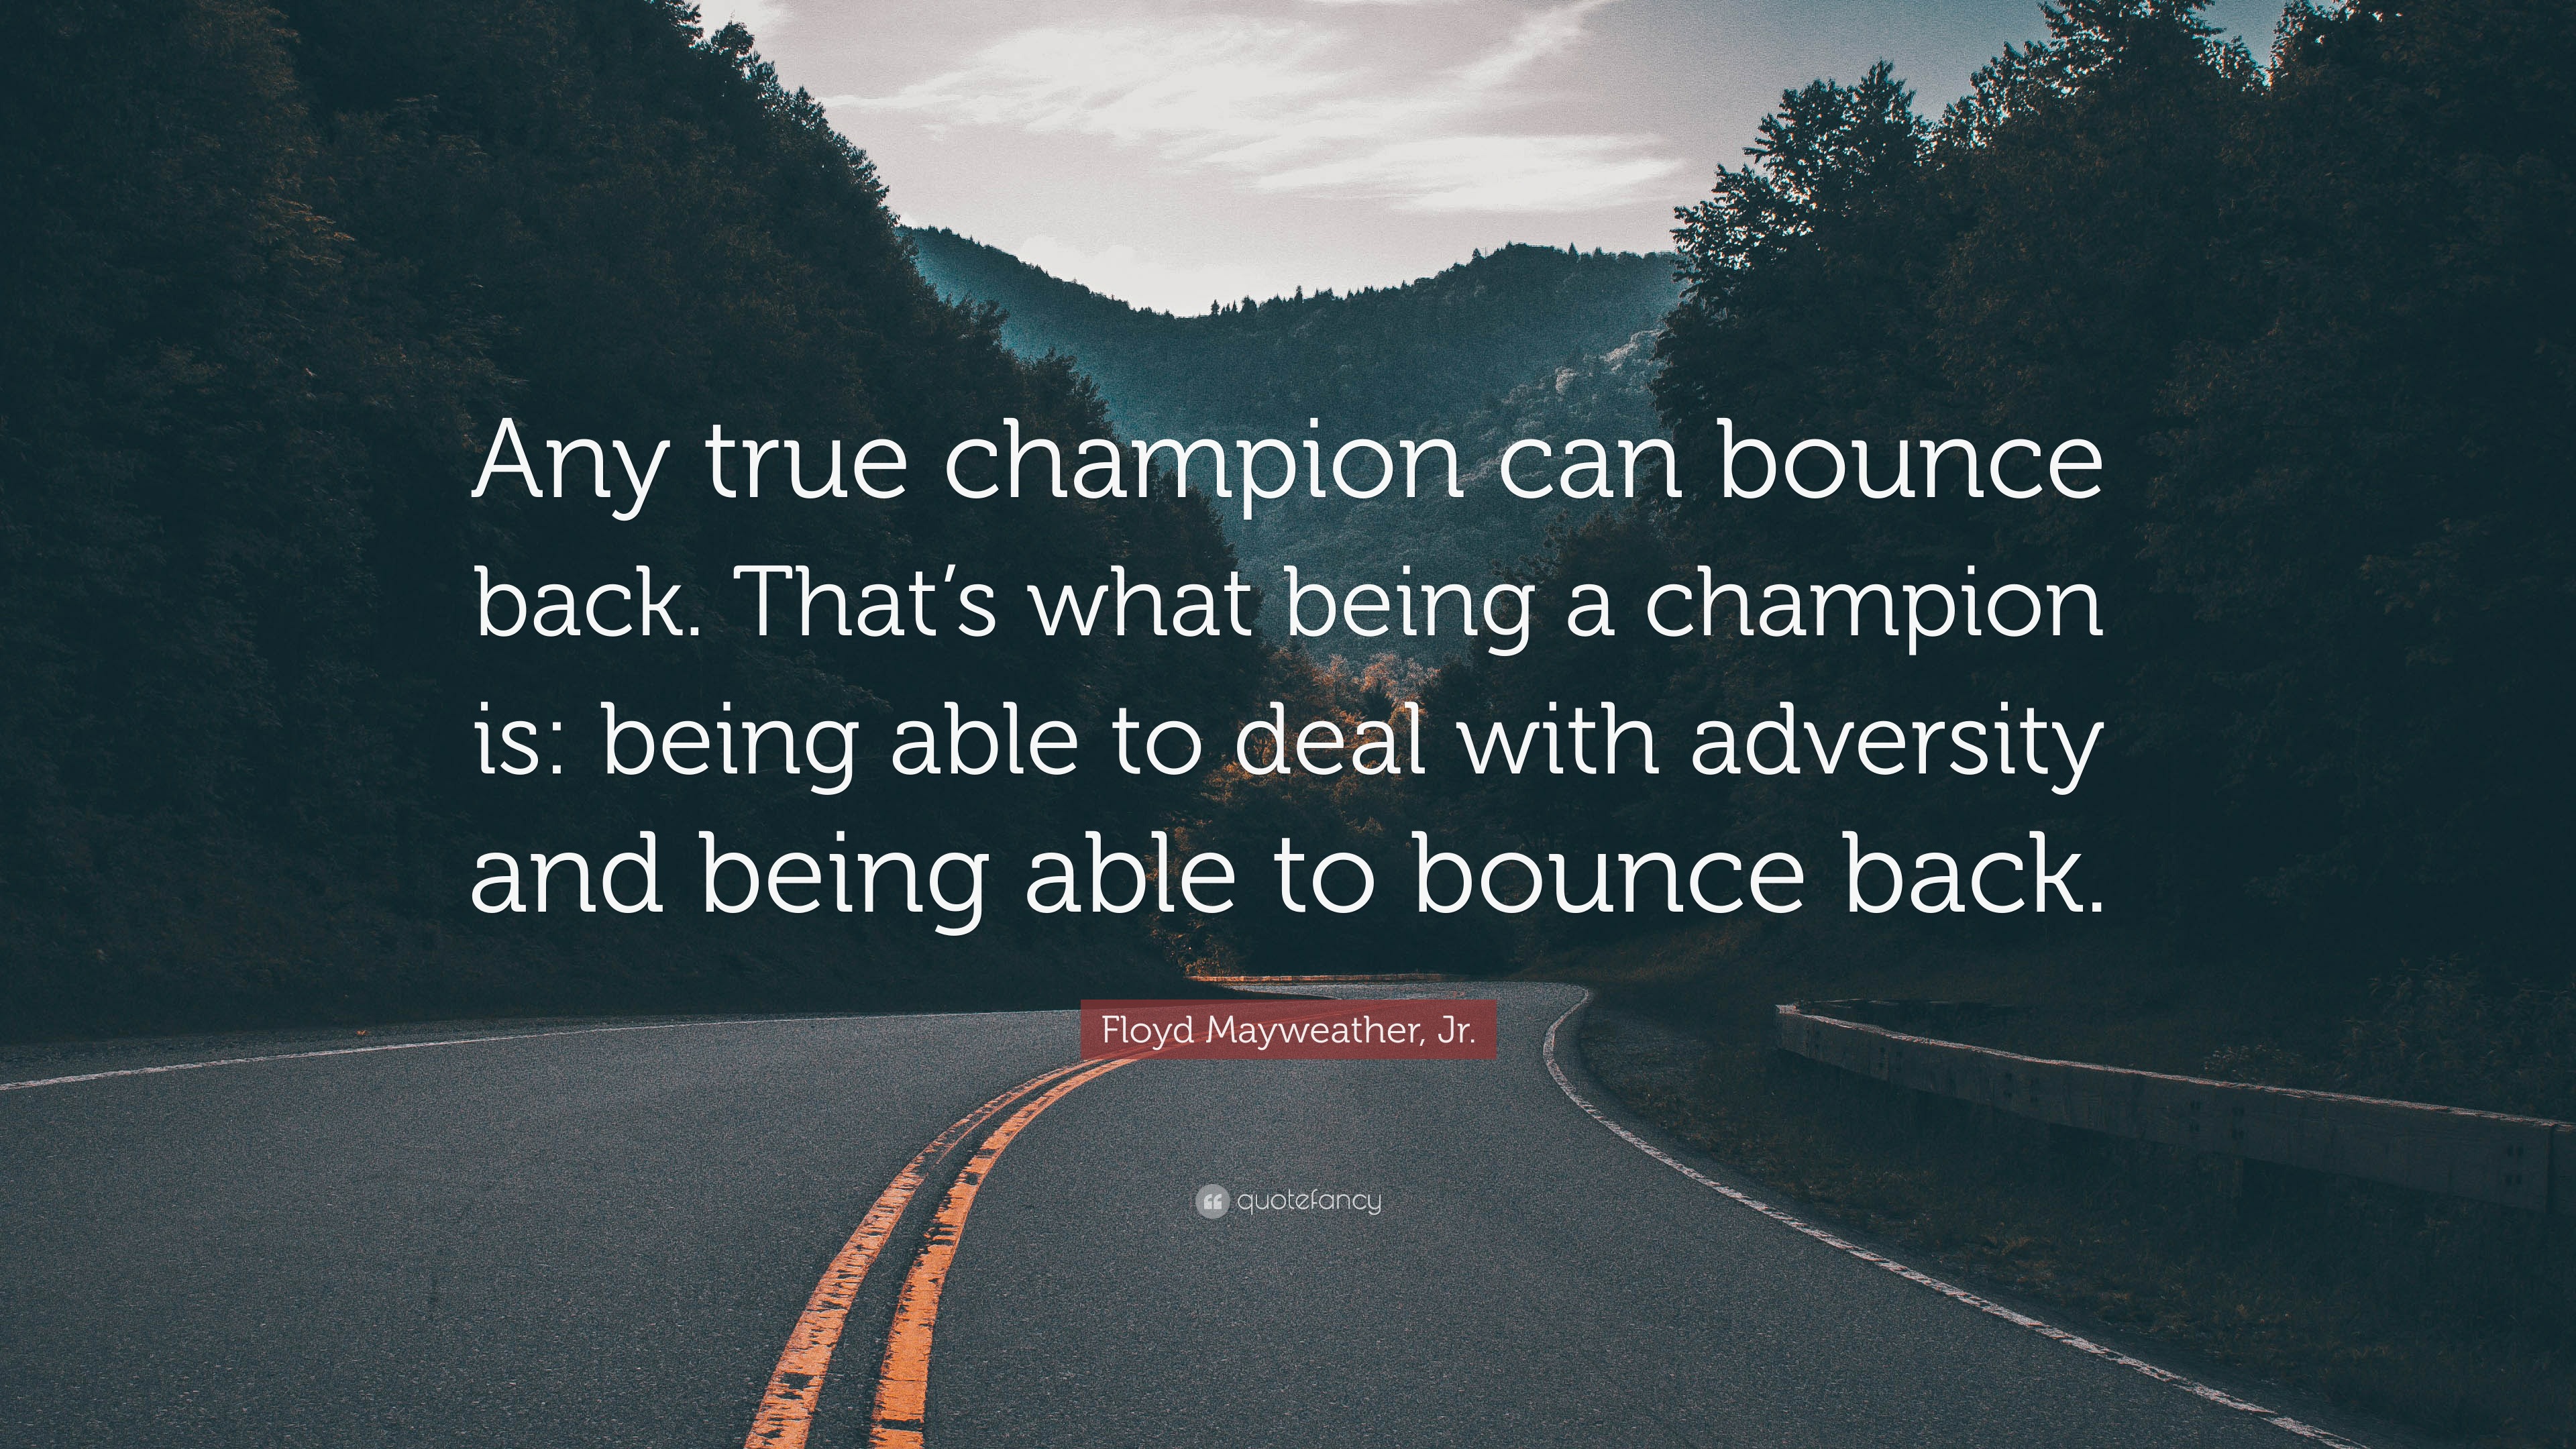 Floyd Mayweather, Jr. Quote: “Any true champion can bounce back. That’s